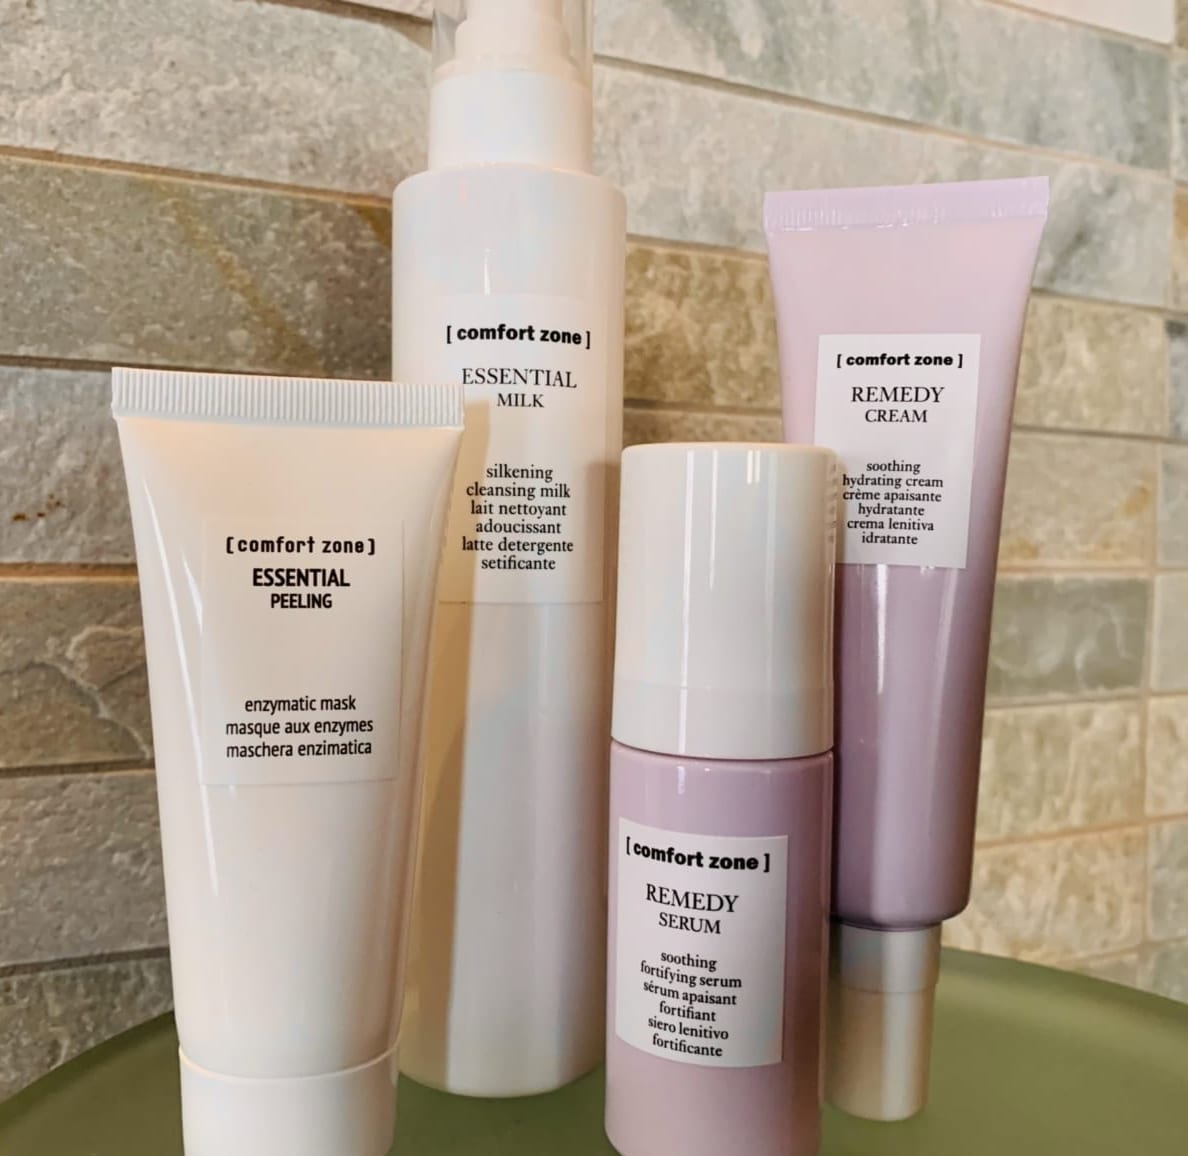 Emerson spa products